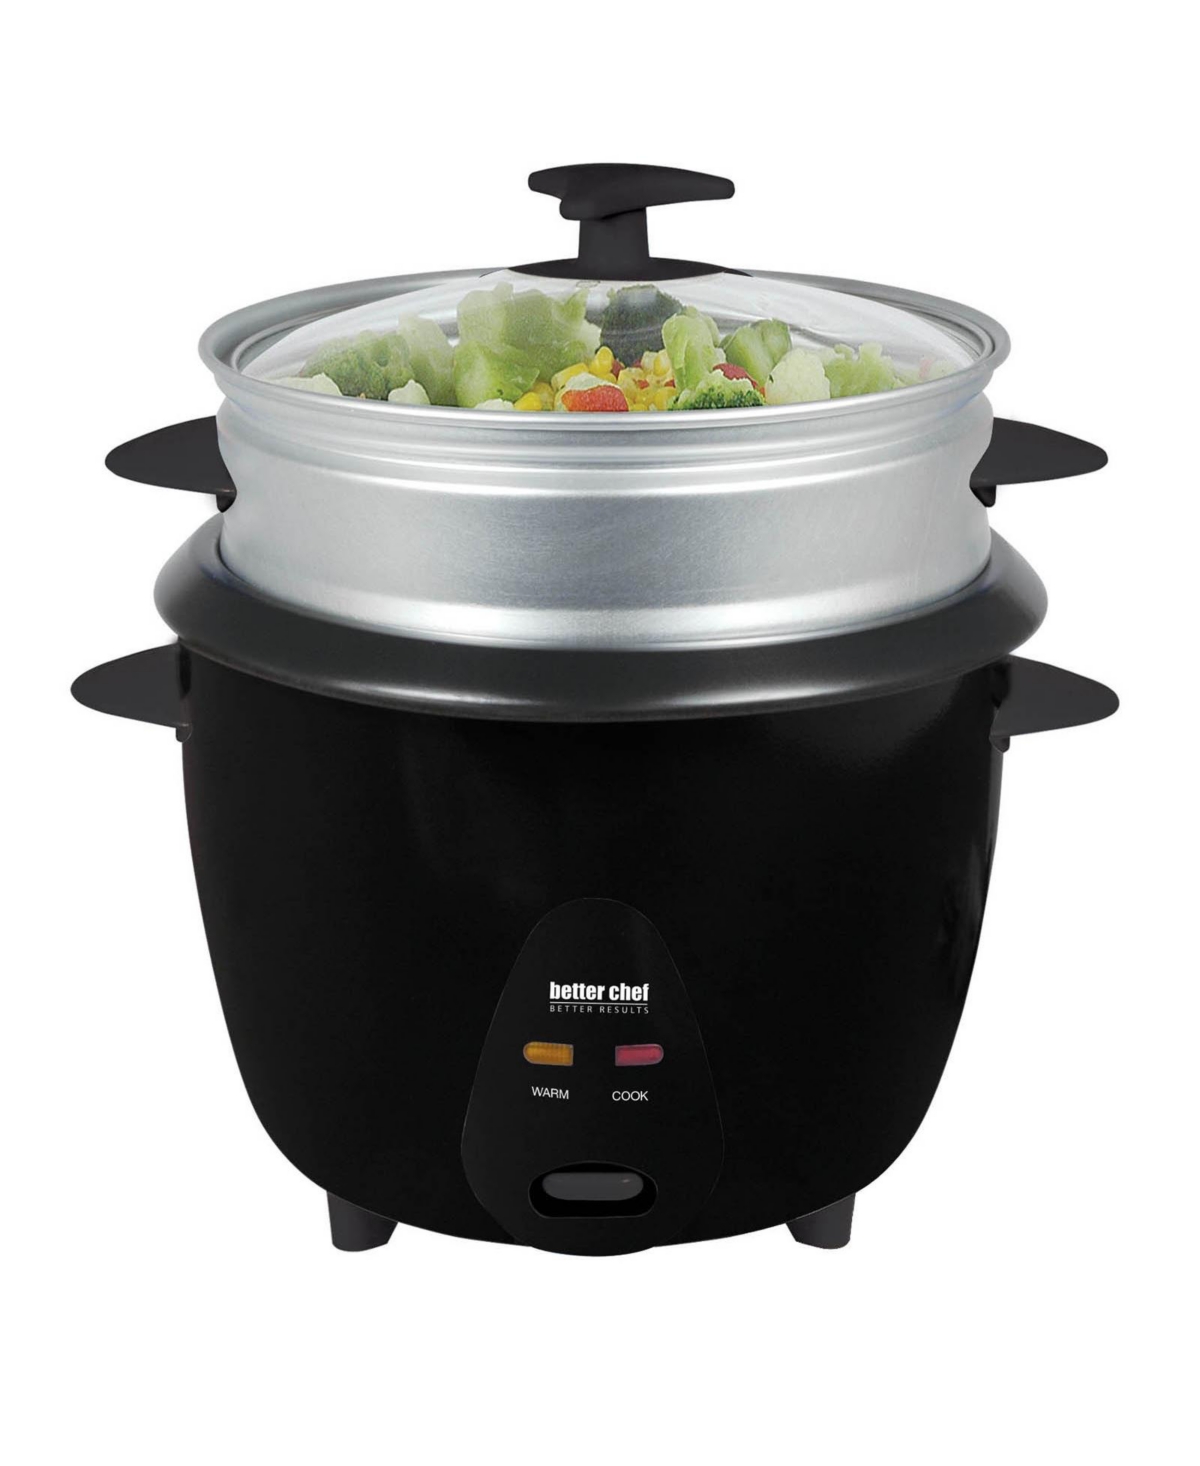 15847826 Better Chef 5 Cup Rice Cooker with Food Steamer At sku 15847826